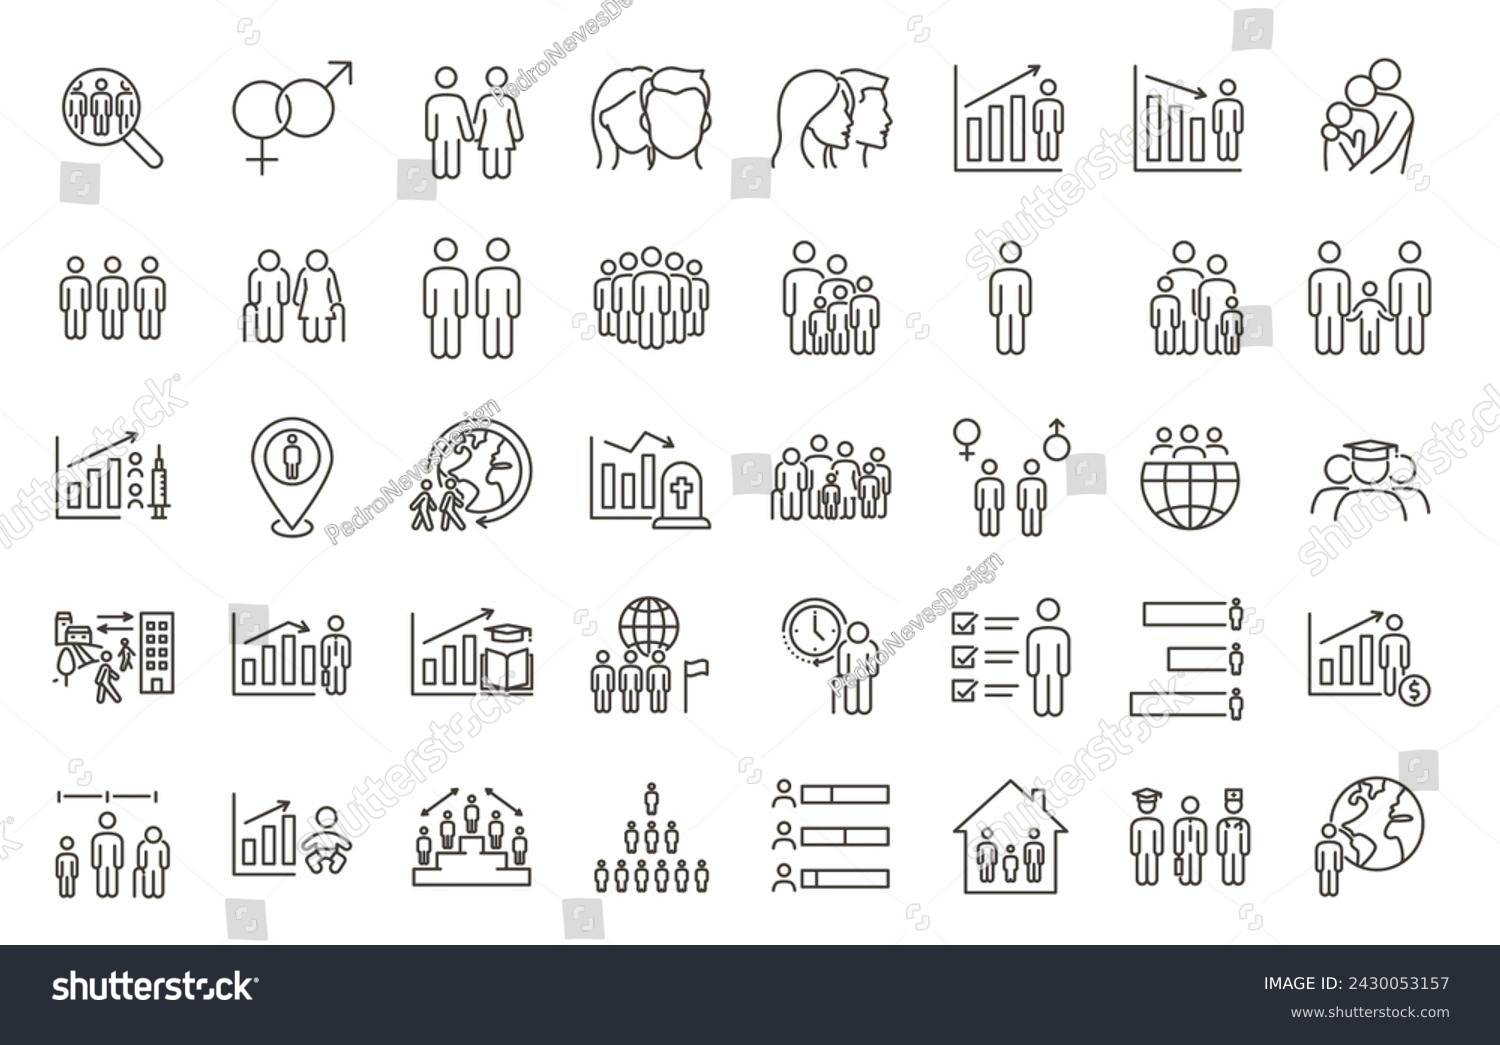 Comprehensive Demographic and Social Trends Icon Set: 40 Thin Line Vector Icons for Population Analysis, Mortality, Longevity, Education, Employment, Gender Diversity, Family Dynamics, and Migration.  #2430053157